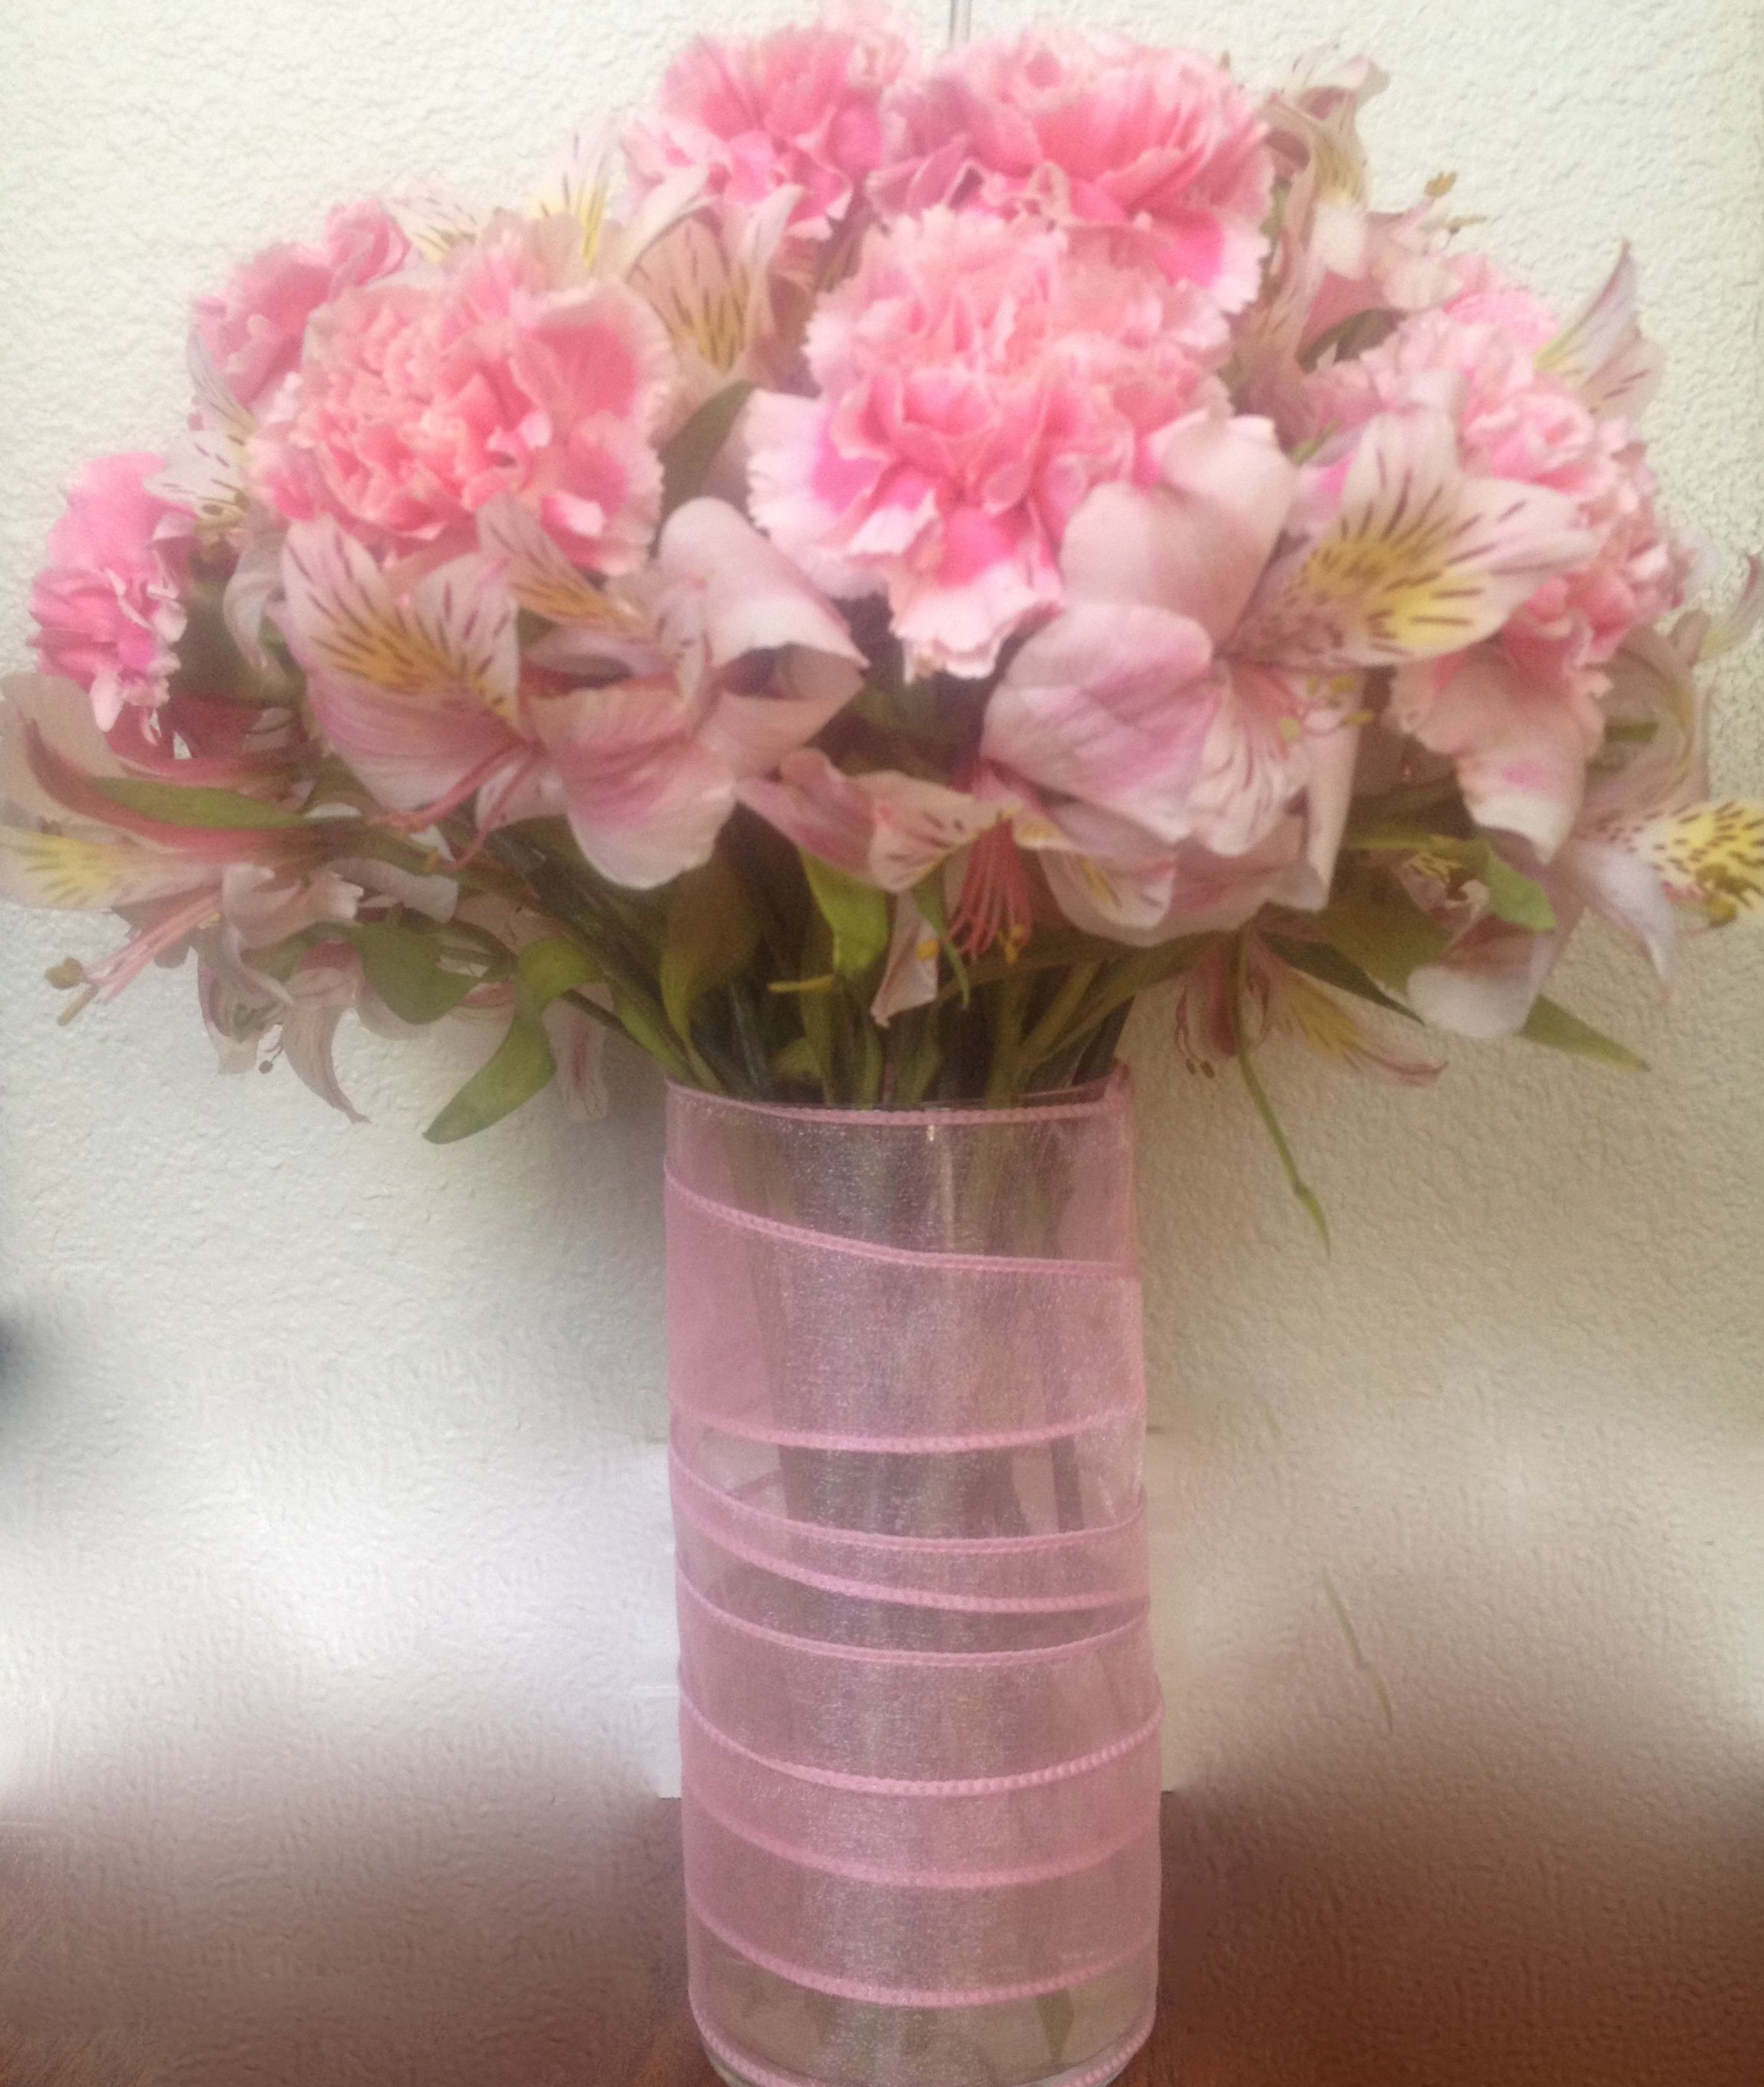 13 Fabulous Blown Glass Vases wholesale 2022 free download blown glass vases wholesale of its a girl pink carnations alstroemeria in a glass vase wrapped for pink carnations alstroemeria in a glass vase wrapped in pink ribbon